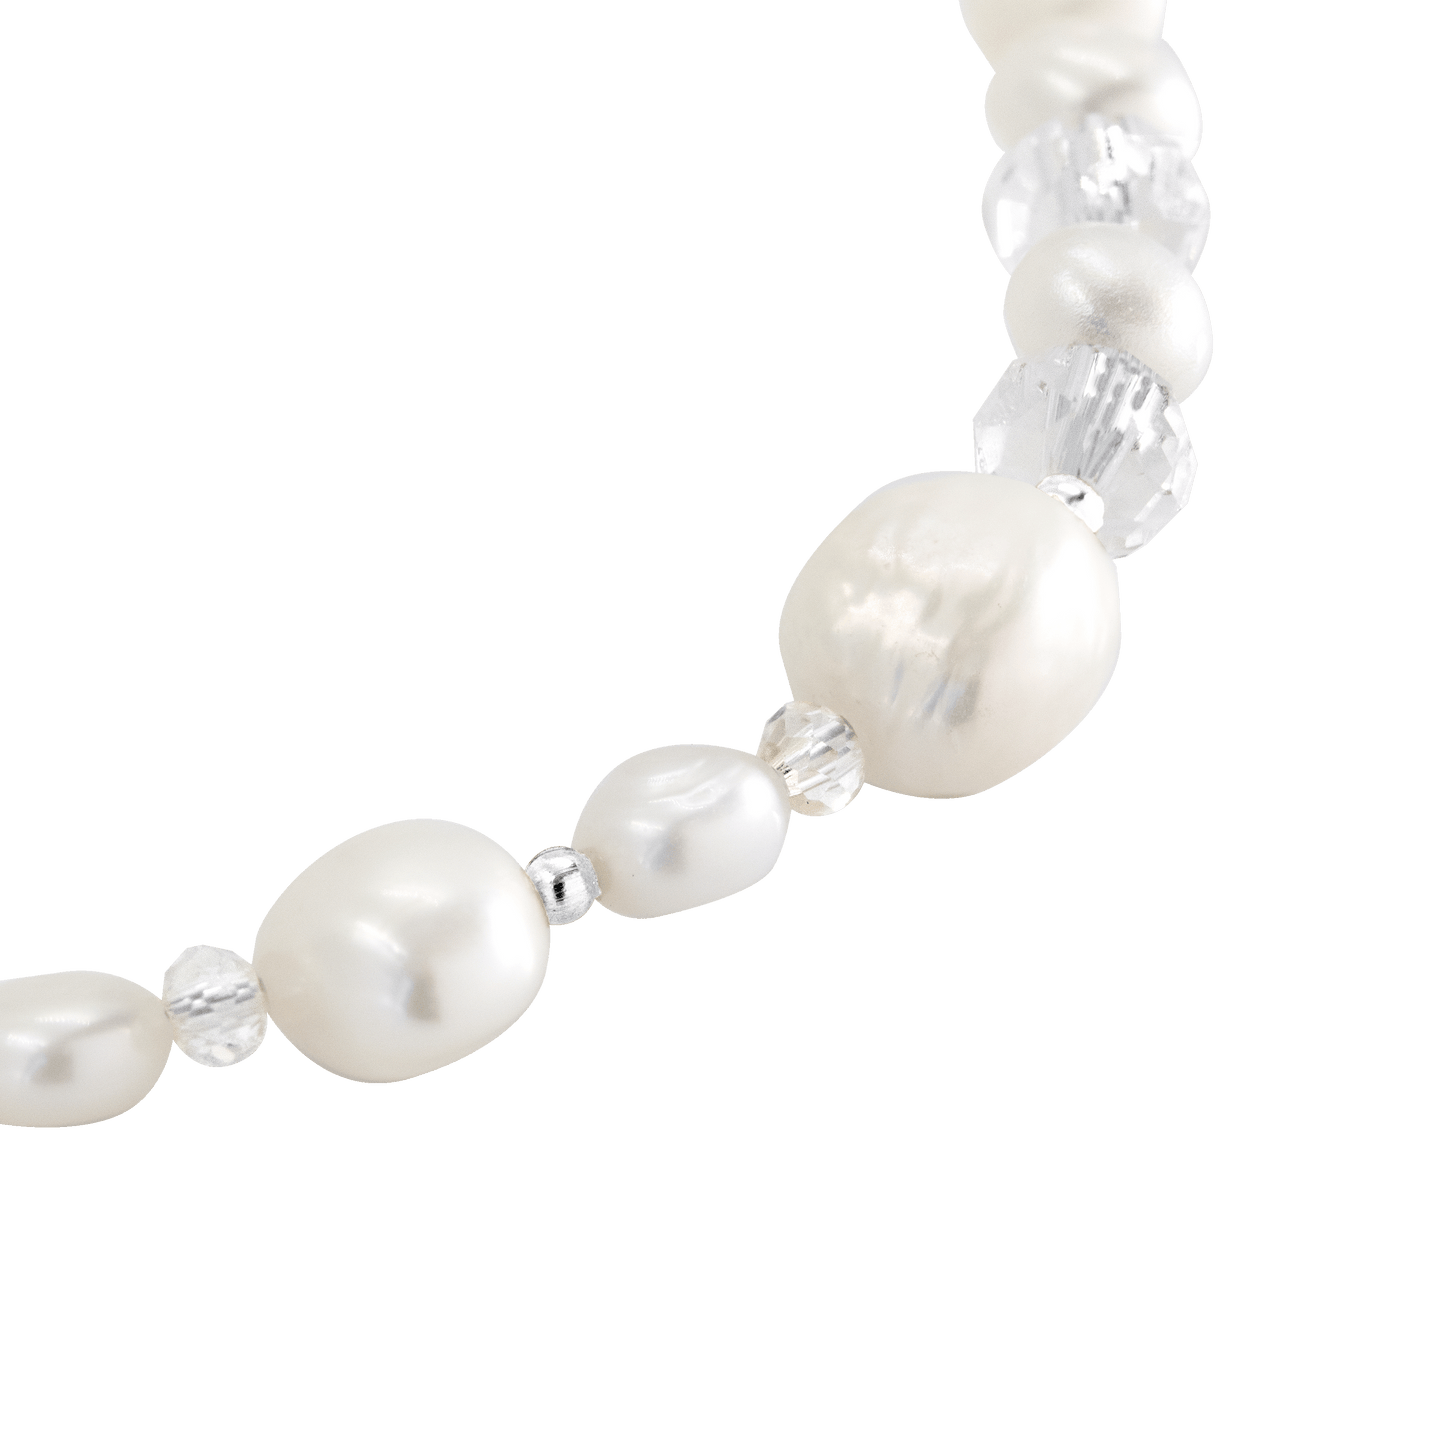 Icy Cool Pearl Necklace Silber